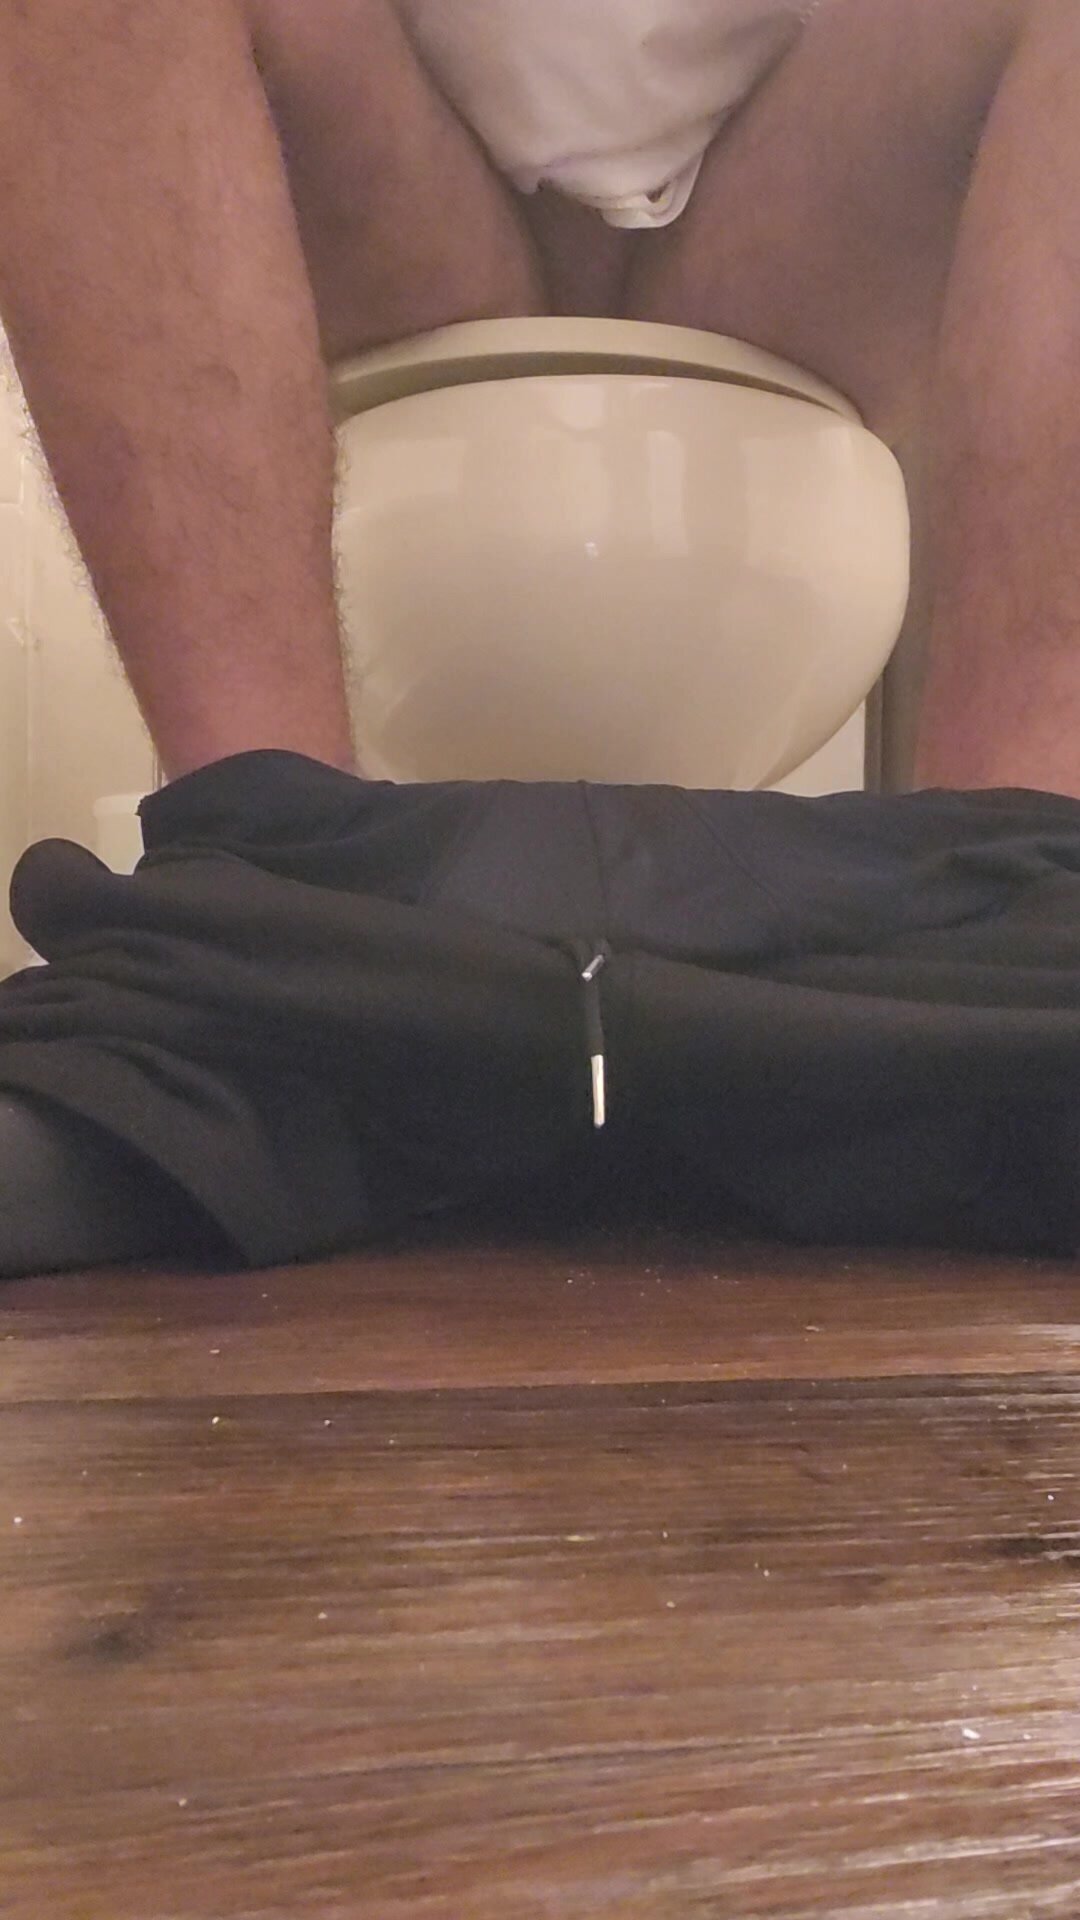 Young HOT boy has a Gassy poop on the toilet